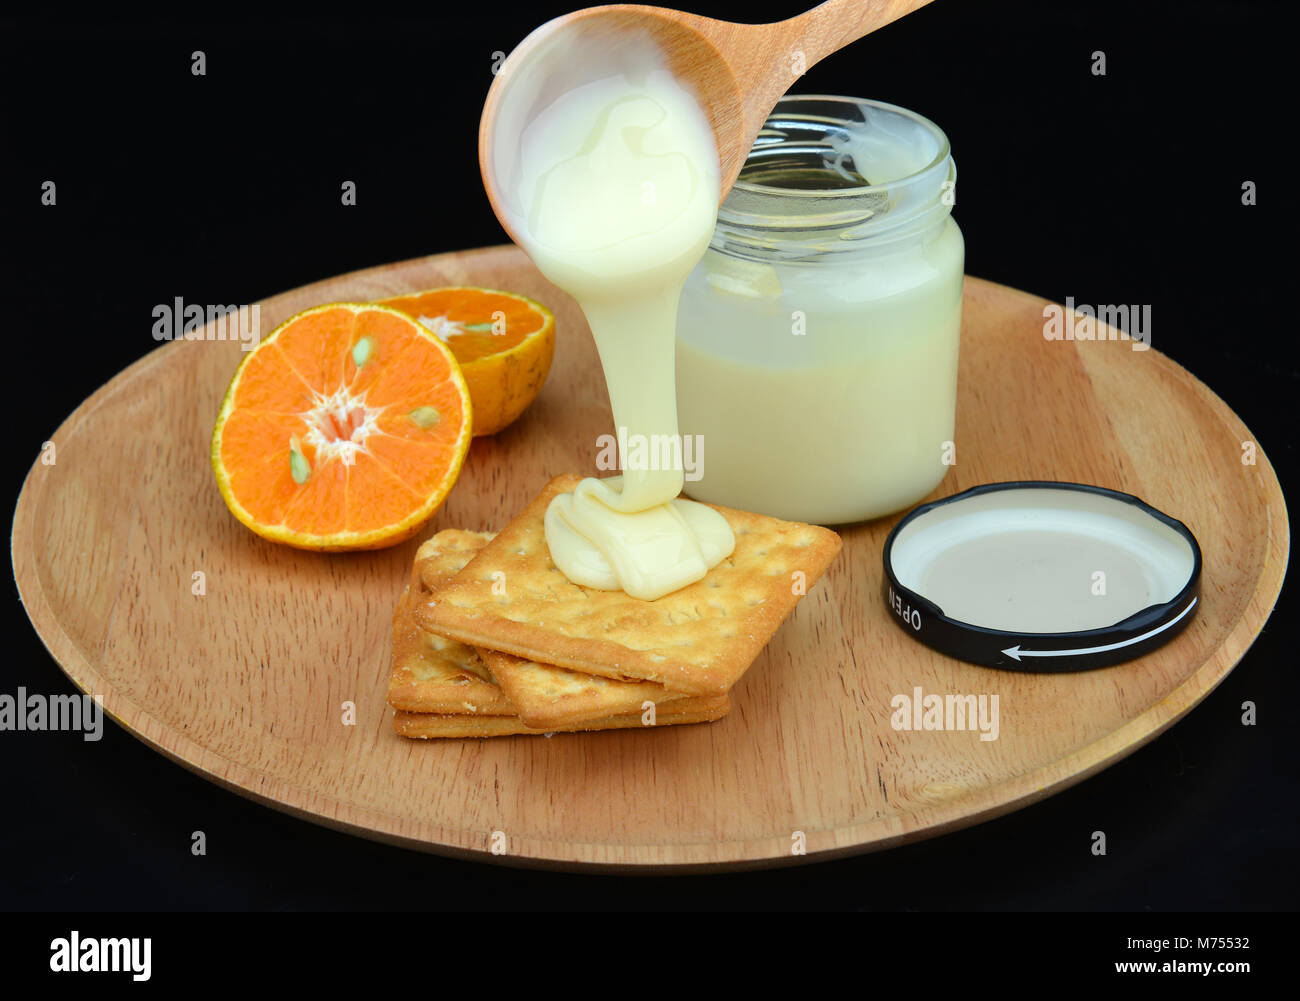 sticky of sweet milk for mix with drink or food and snack Stock Photo